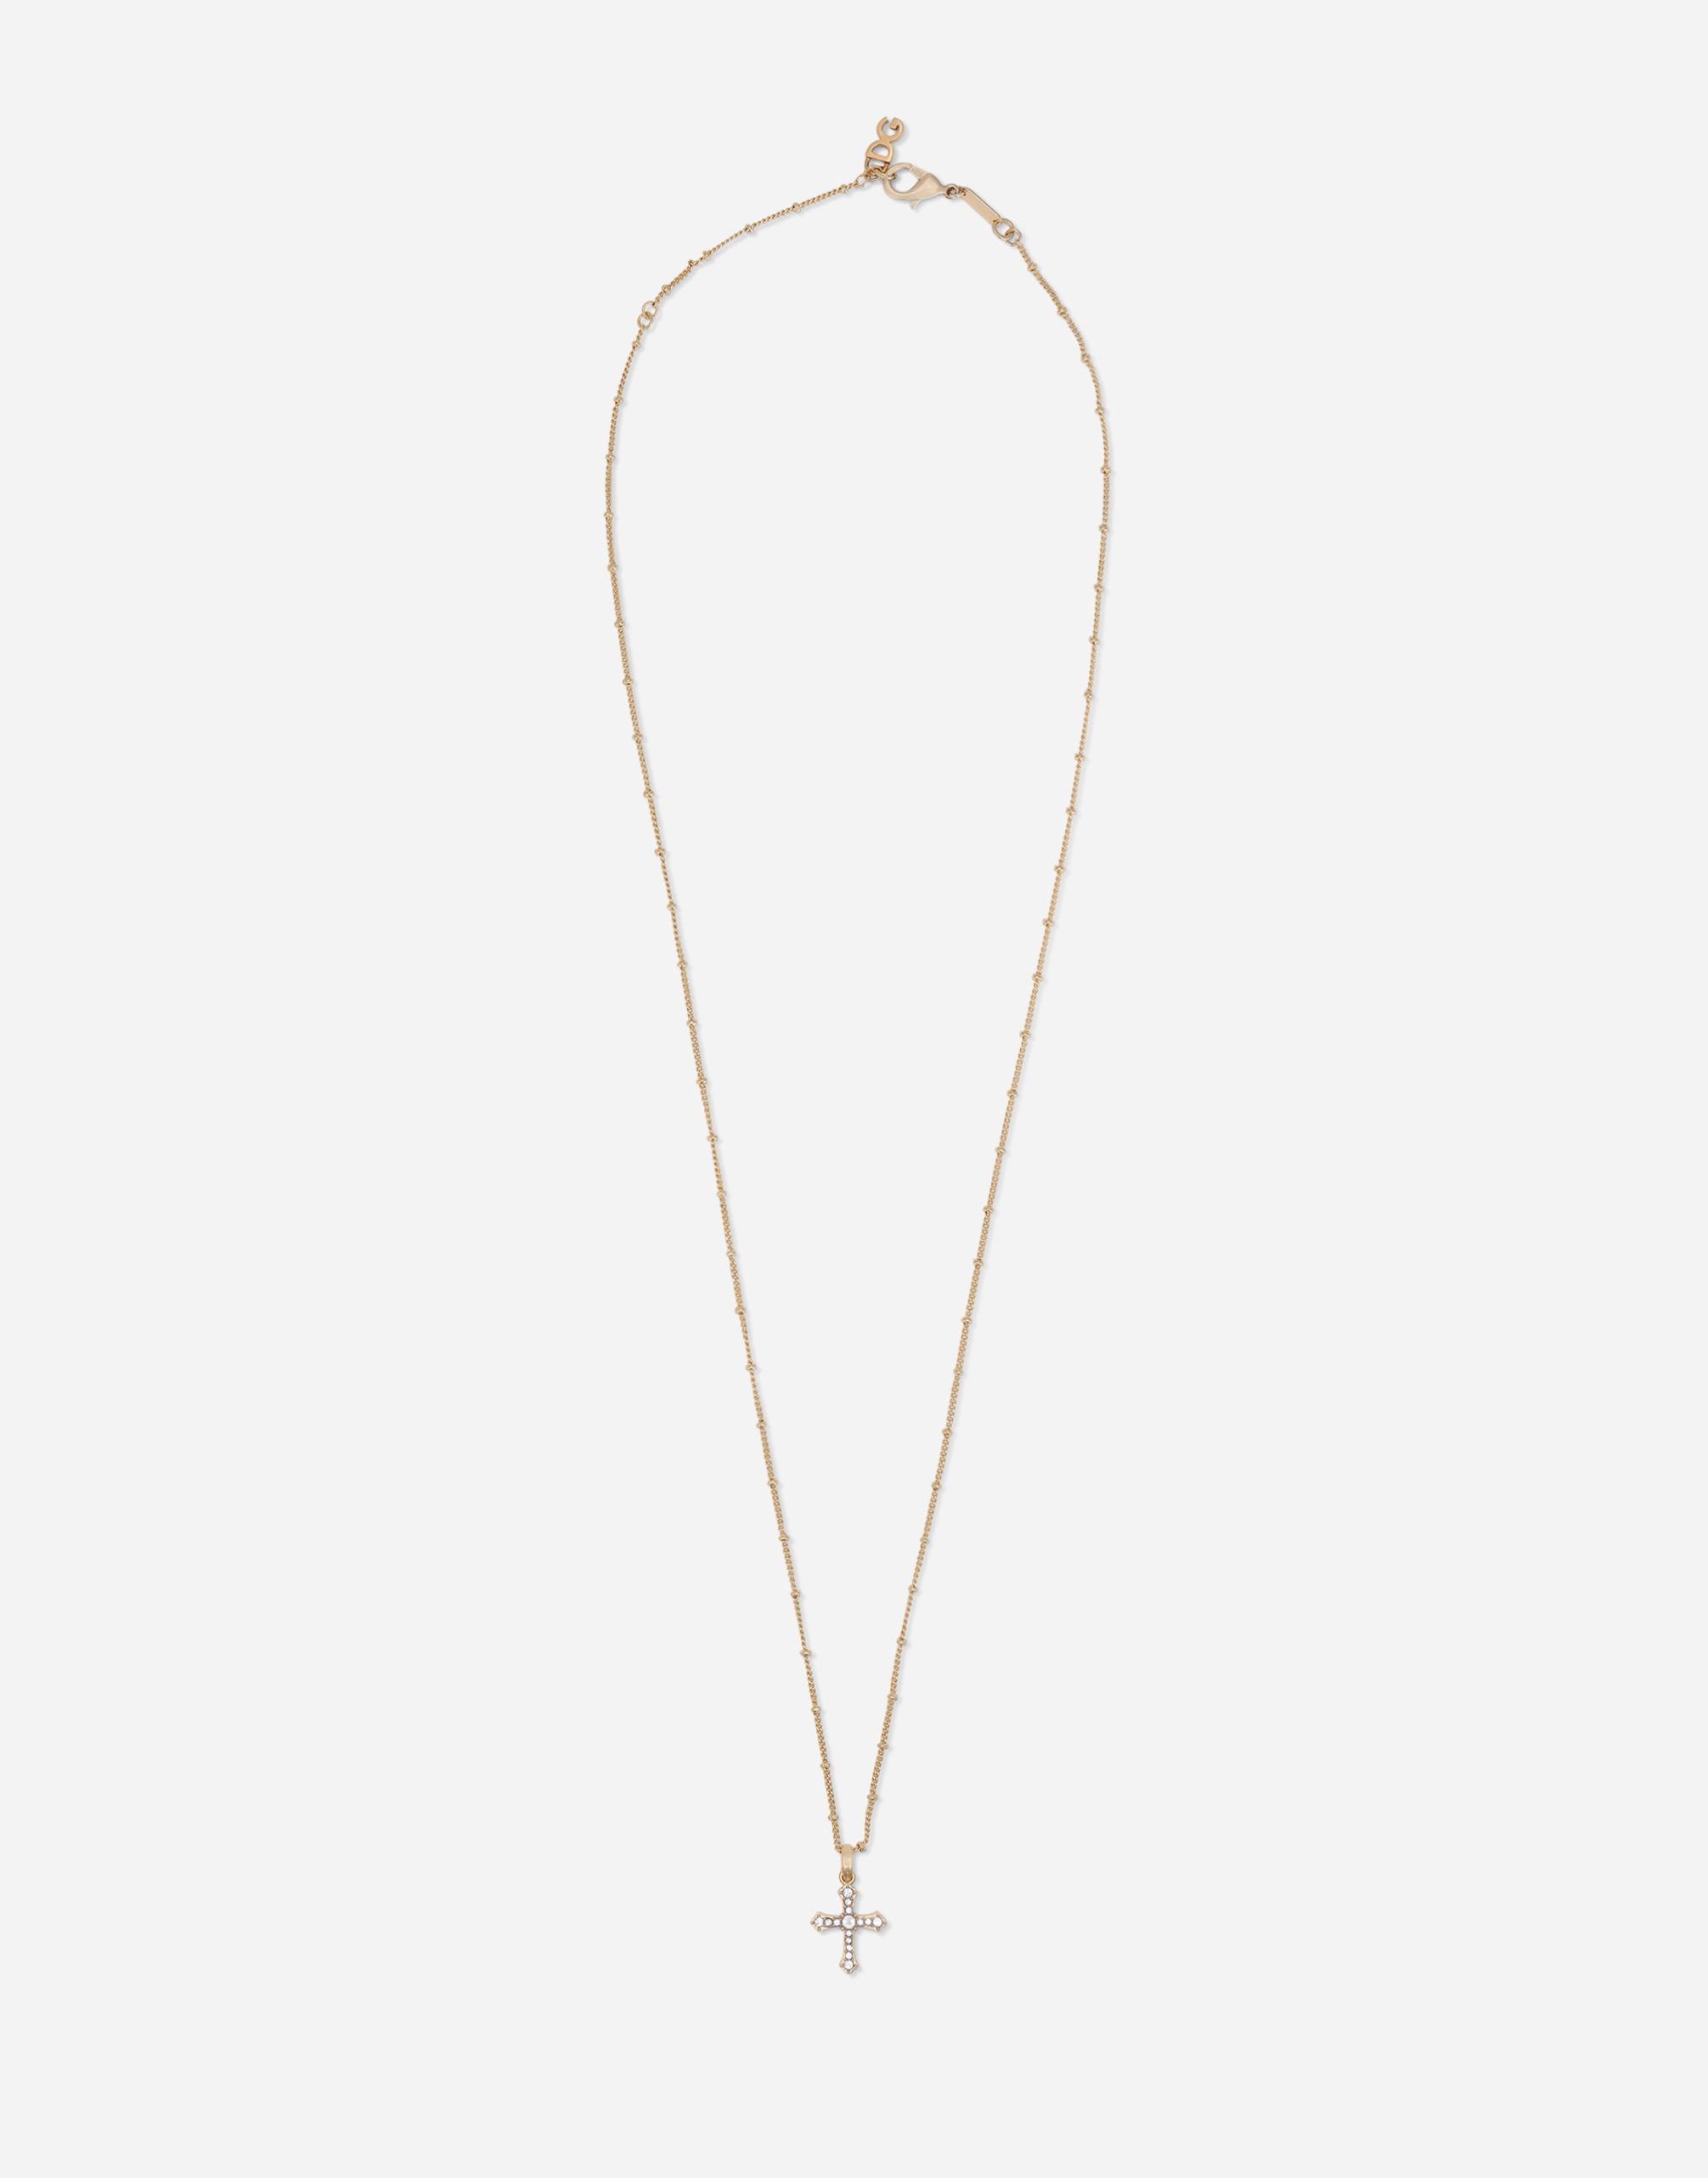 Men's Collection in Gold | Cross necklace | Dolce&Gabbana